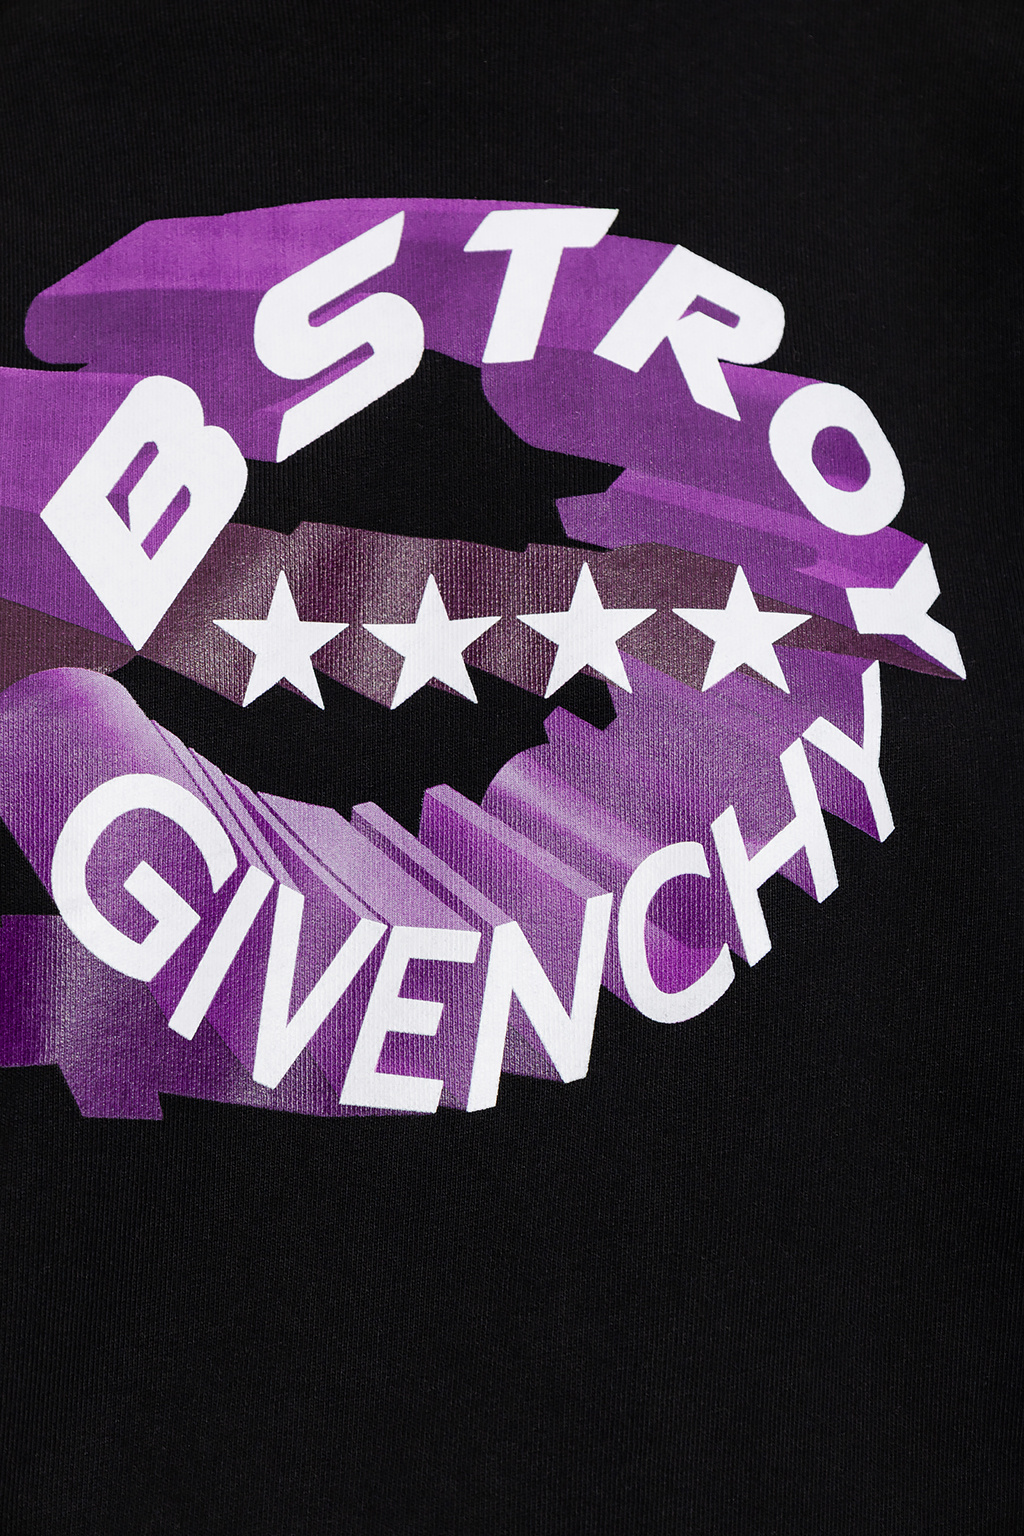 Marcelo Burlon or Givenchy? does it matter? those tshirts are just